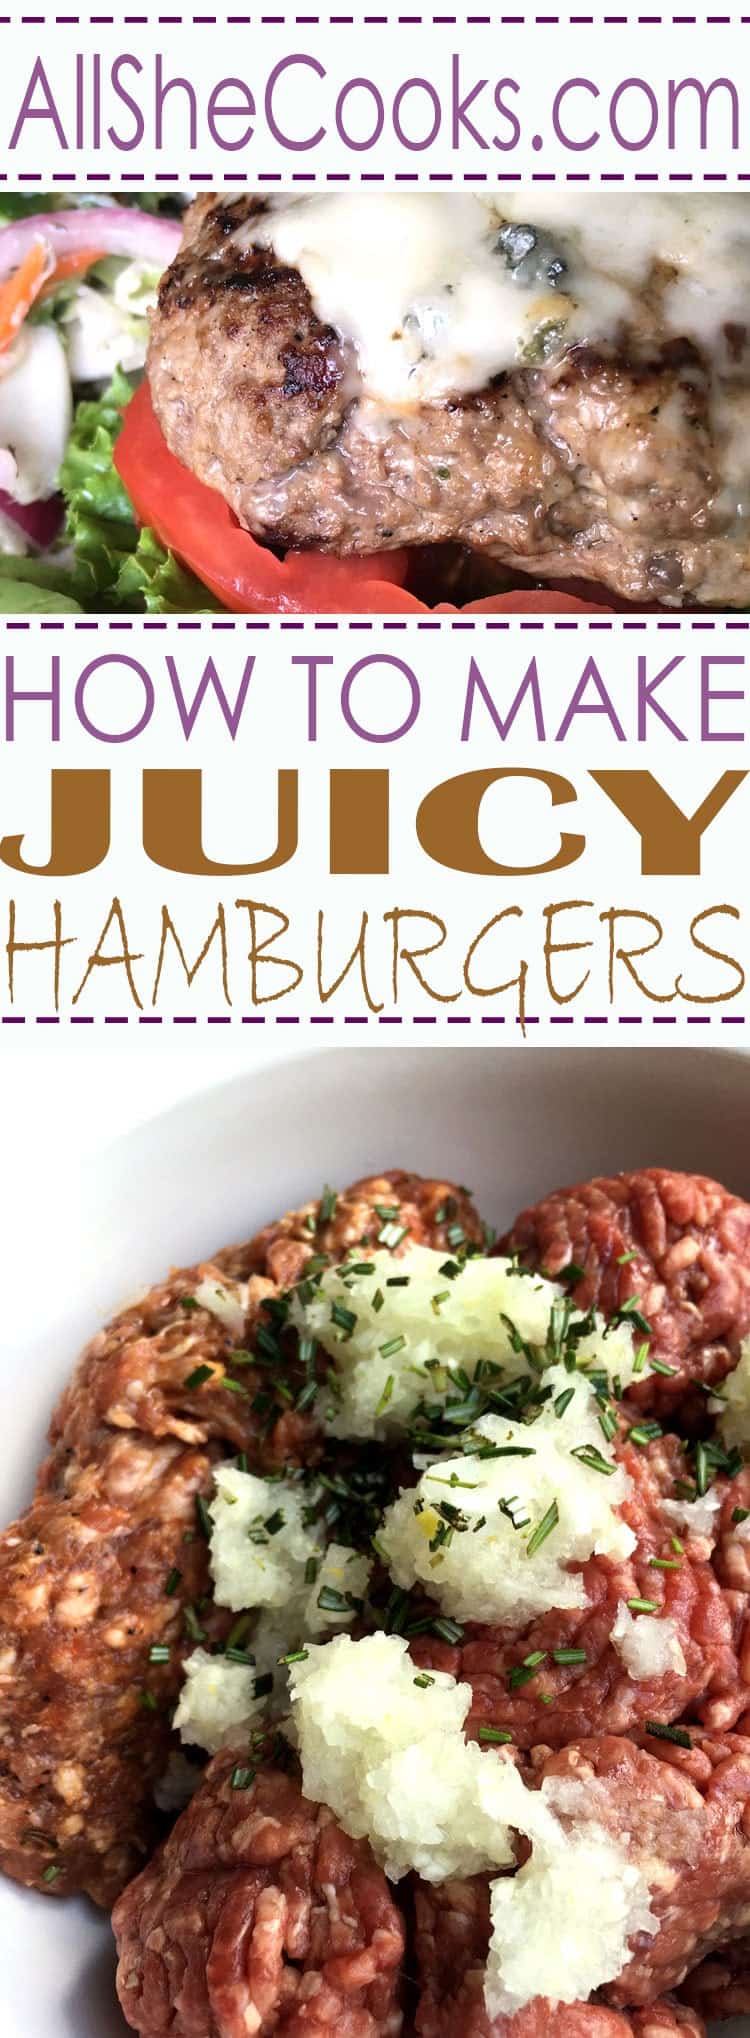 Learn how to make a juicy hamburger recipe from scratch. This is the best burger recipe and it is perfect for grilling out.